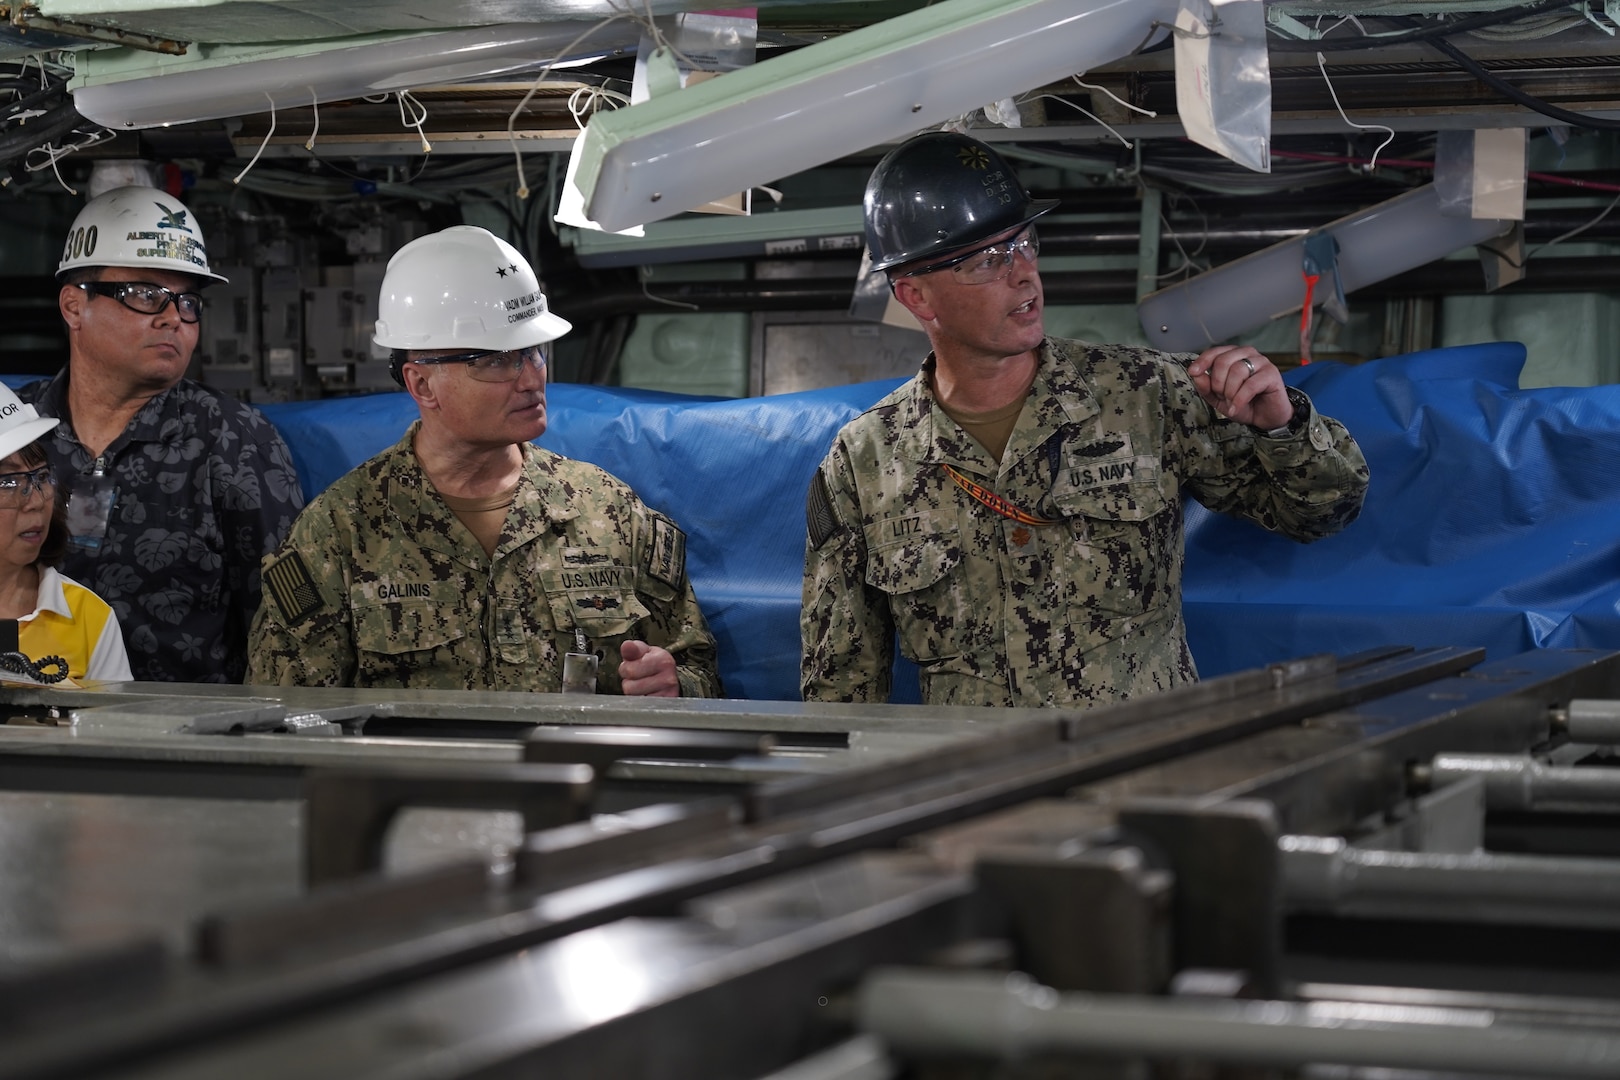 Vice Adm. Bill Galinis, (third from left) Commander of Naval Sea Systems Command (NAVSEA), discusses maintenance projects with Lt. Cmdr. D. Litz (right), Executive Officer, USS Tucson (SSN-770), May 13, 2022.

Galinis along with Ms. Giao Phan, Executive Director for NAVSEA visited Pearl Harbor Naval Shipyard and Intermediate Maintenance Facility to assess the alignment and progress on implementing the U.S. Navy’s Naval Sustainment System – Shipyard (NSS-SY) performance improvement initiatives while conducting a review of shipyard operations in Hawaii. (Official U.S. Navy photo by Marc Ayalin)